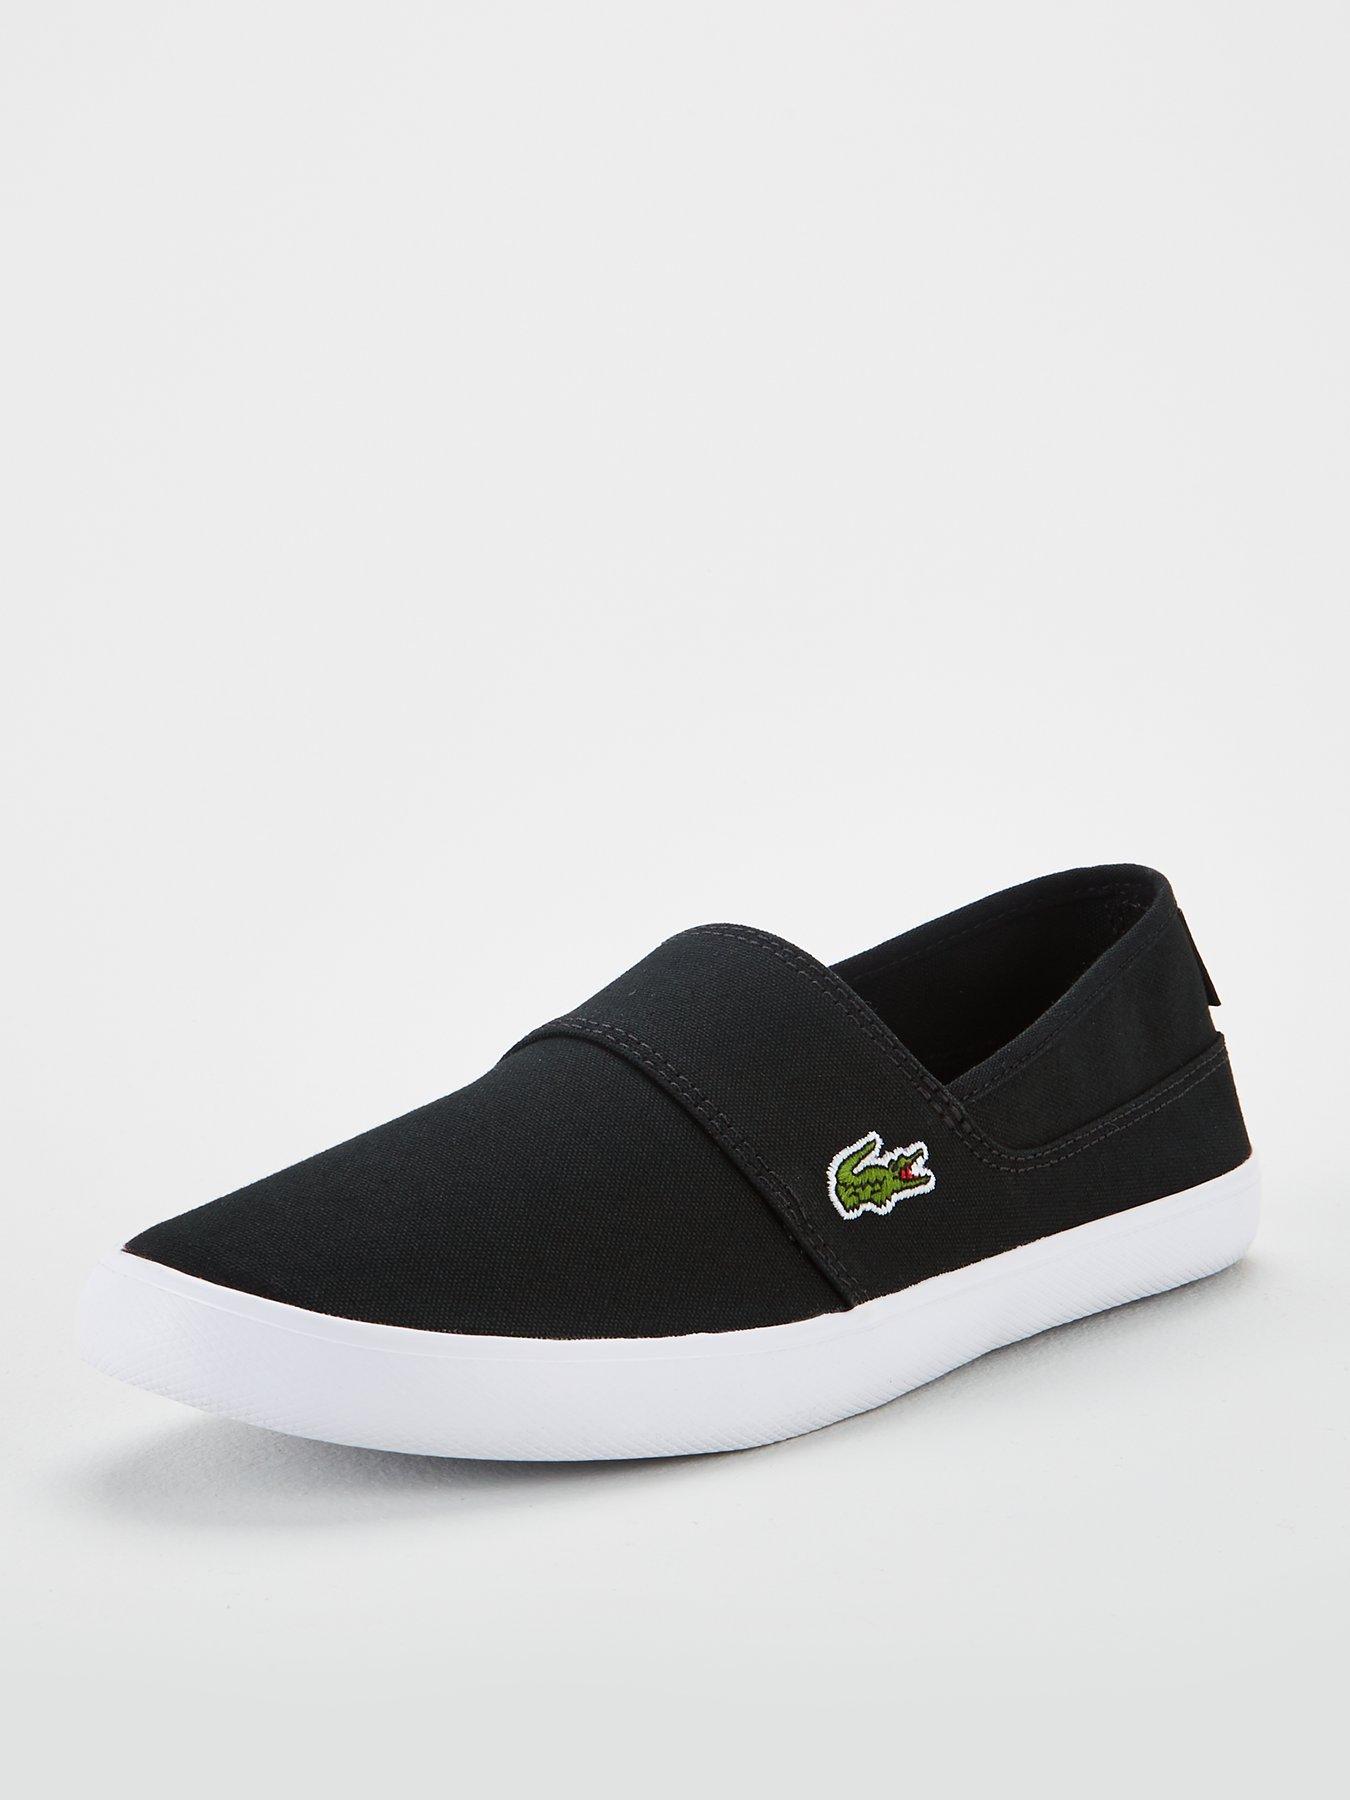 black lacoste trainers size 6